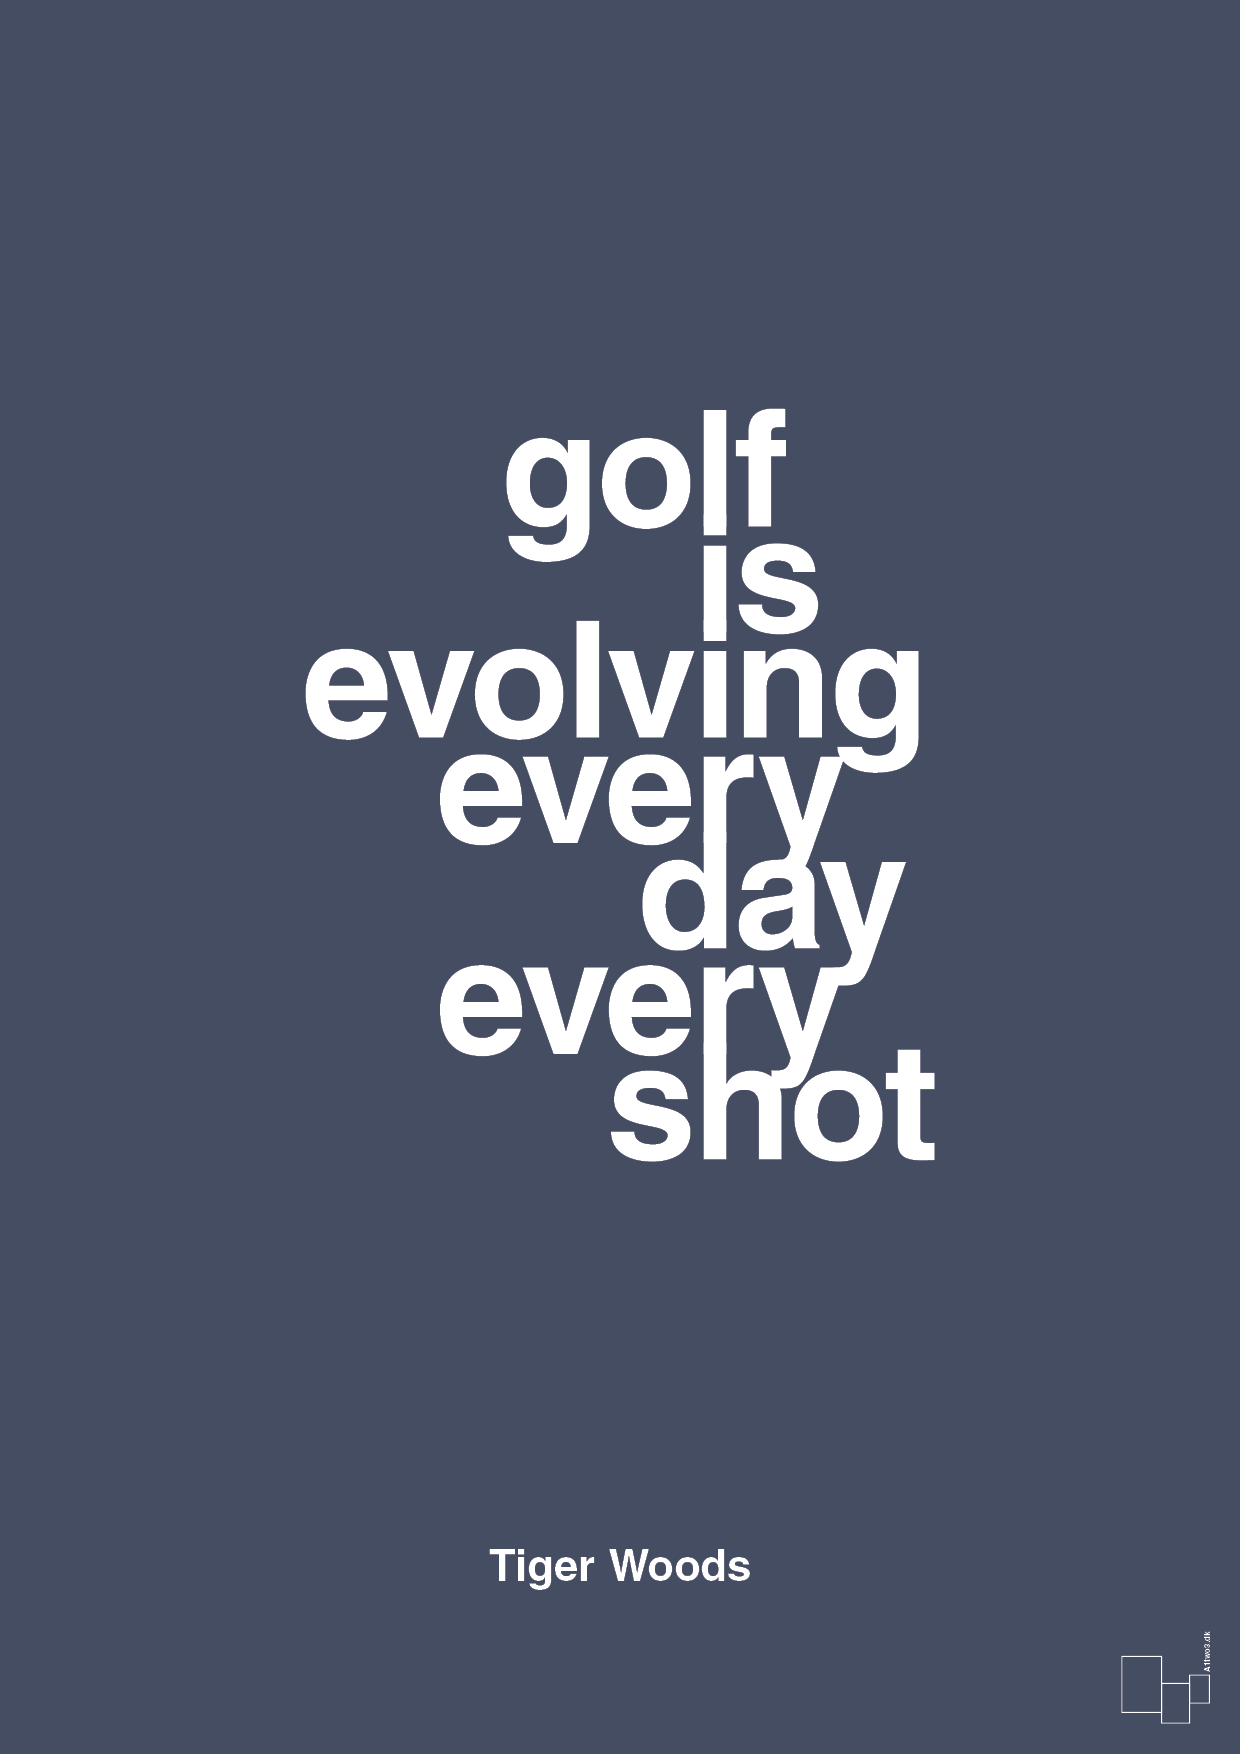 golf is evolving every day every shot - Plakat med Citater i Petrol